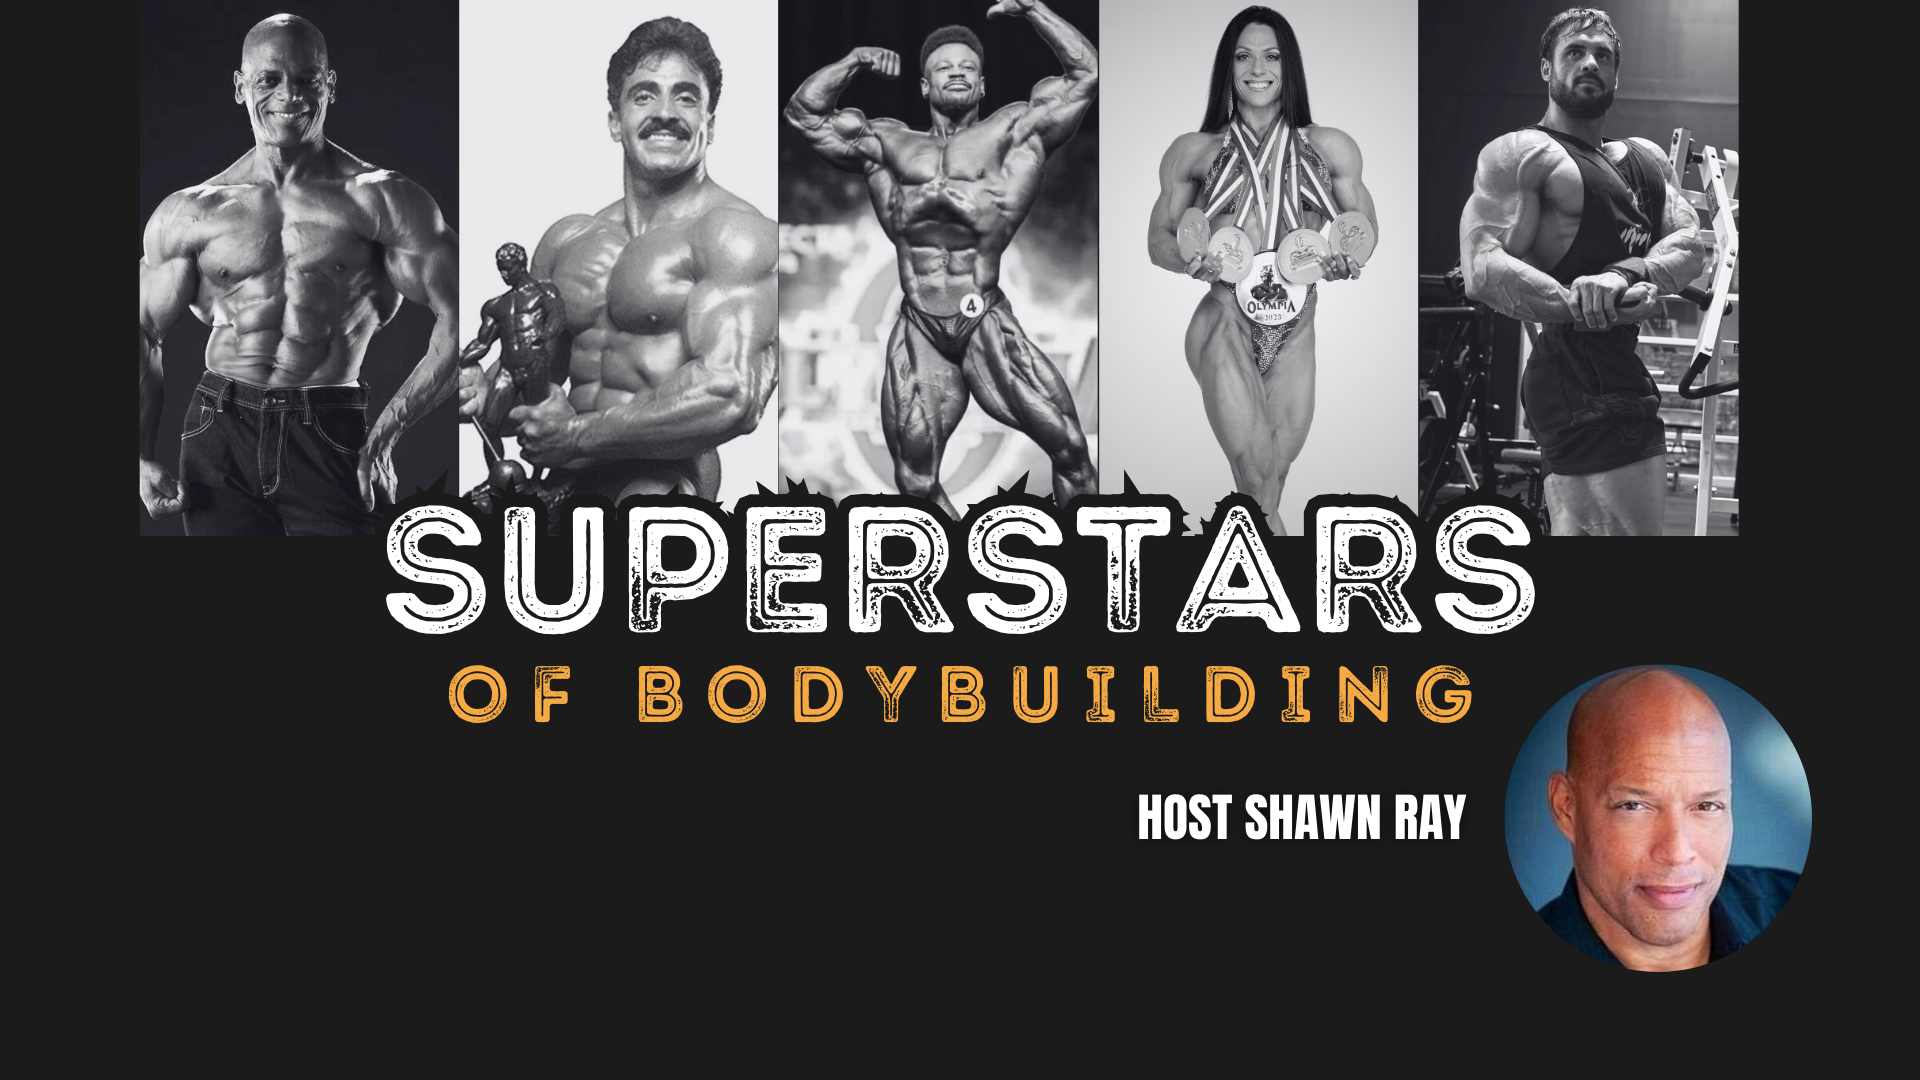 Sunday 1:45 PM – 2:30 PM<br>SUPERSTARS OF BODYBUILDING YESTERDAY & TODAY! Q&A